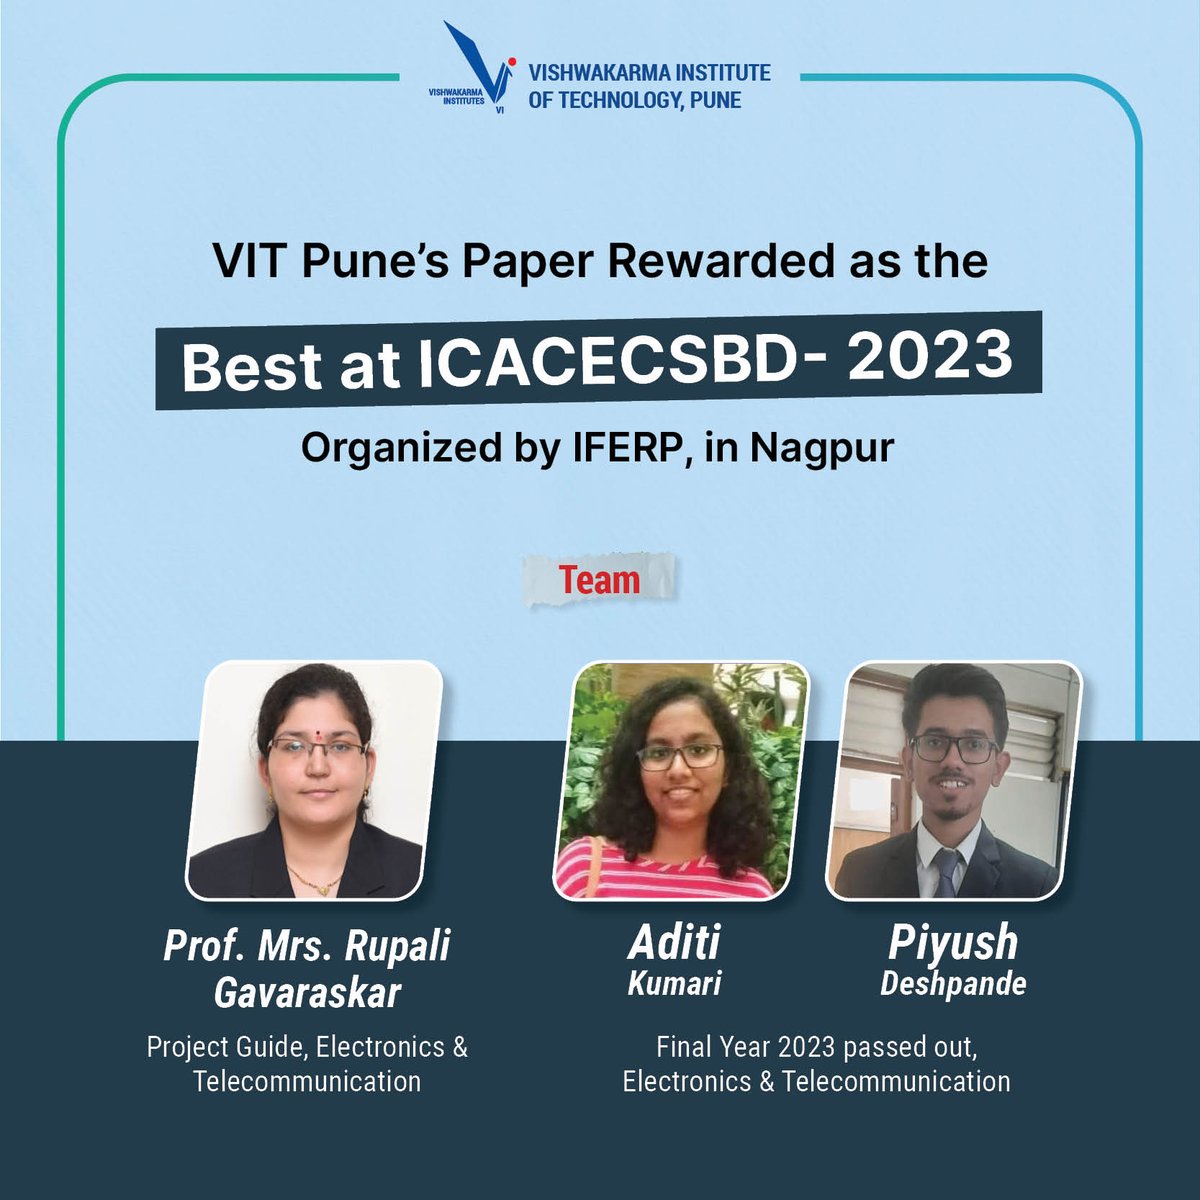 We are delighted to announce that our paper has been awarded the Best in the ICACECSBD-2023 organized by IFERP in Nagpur on 26th and 27th of May, 2023.
#BestPaperAward #ProudMoment #ICACECSBD #TeamWork #researchpaper #IFERP #vitpune #congratulation #engineeringinstitute